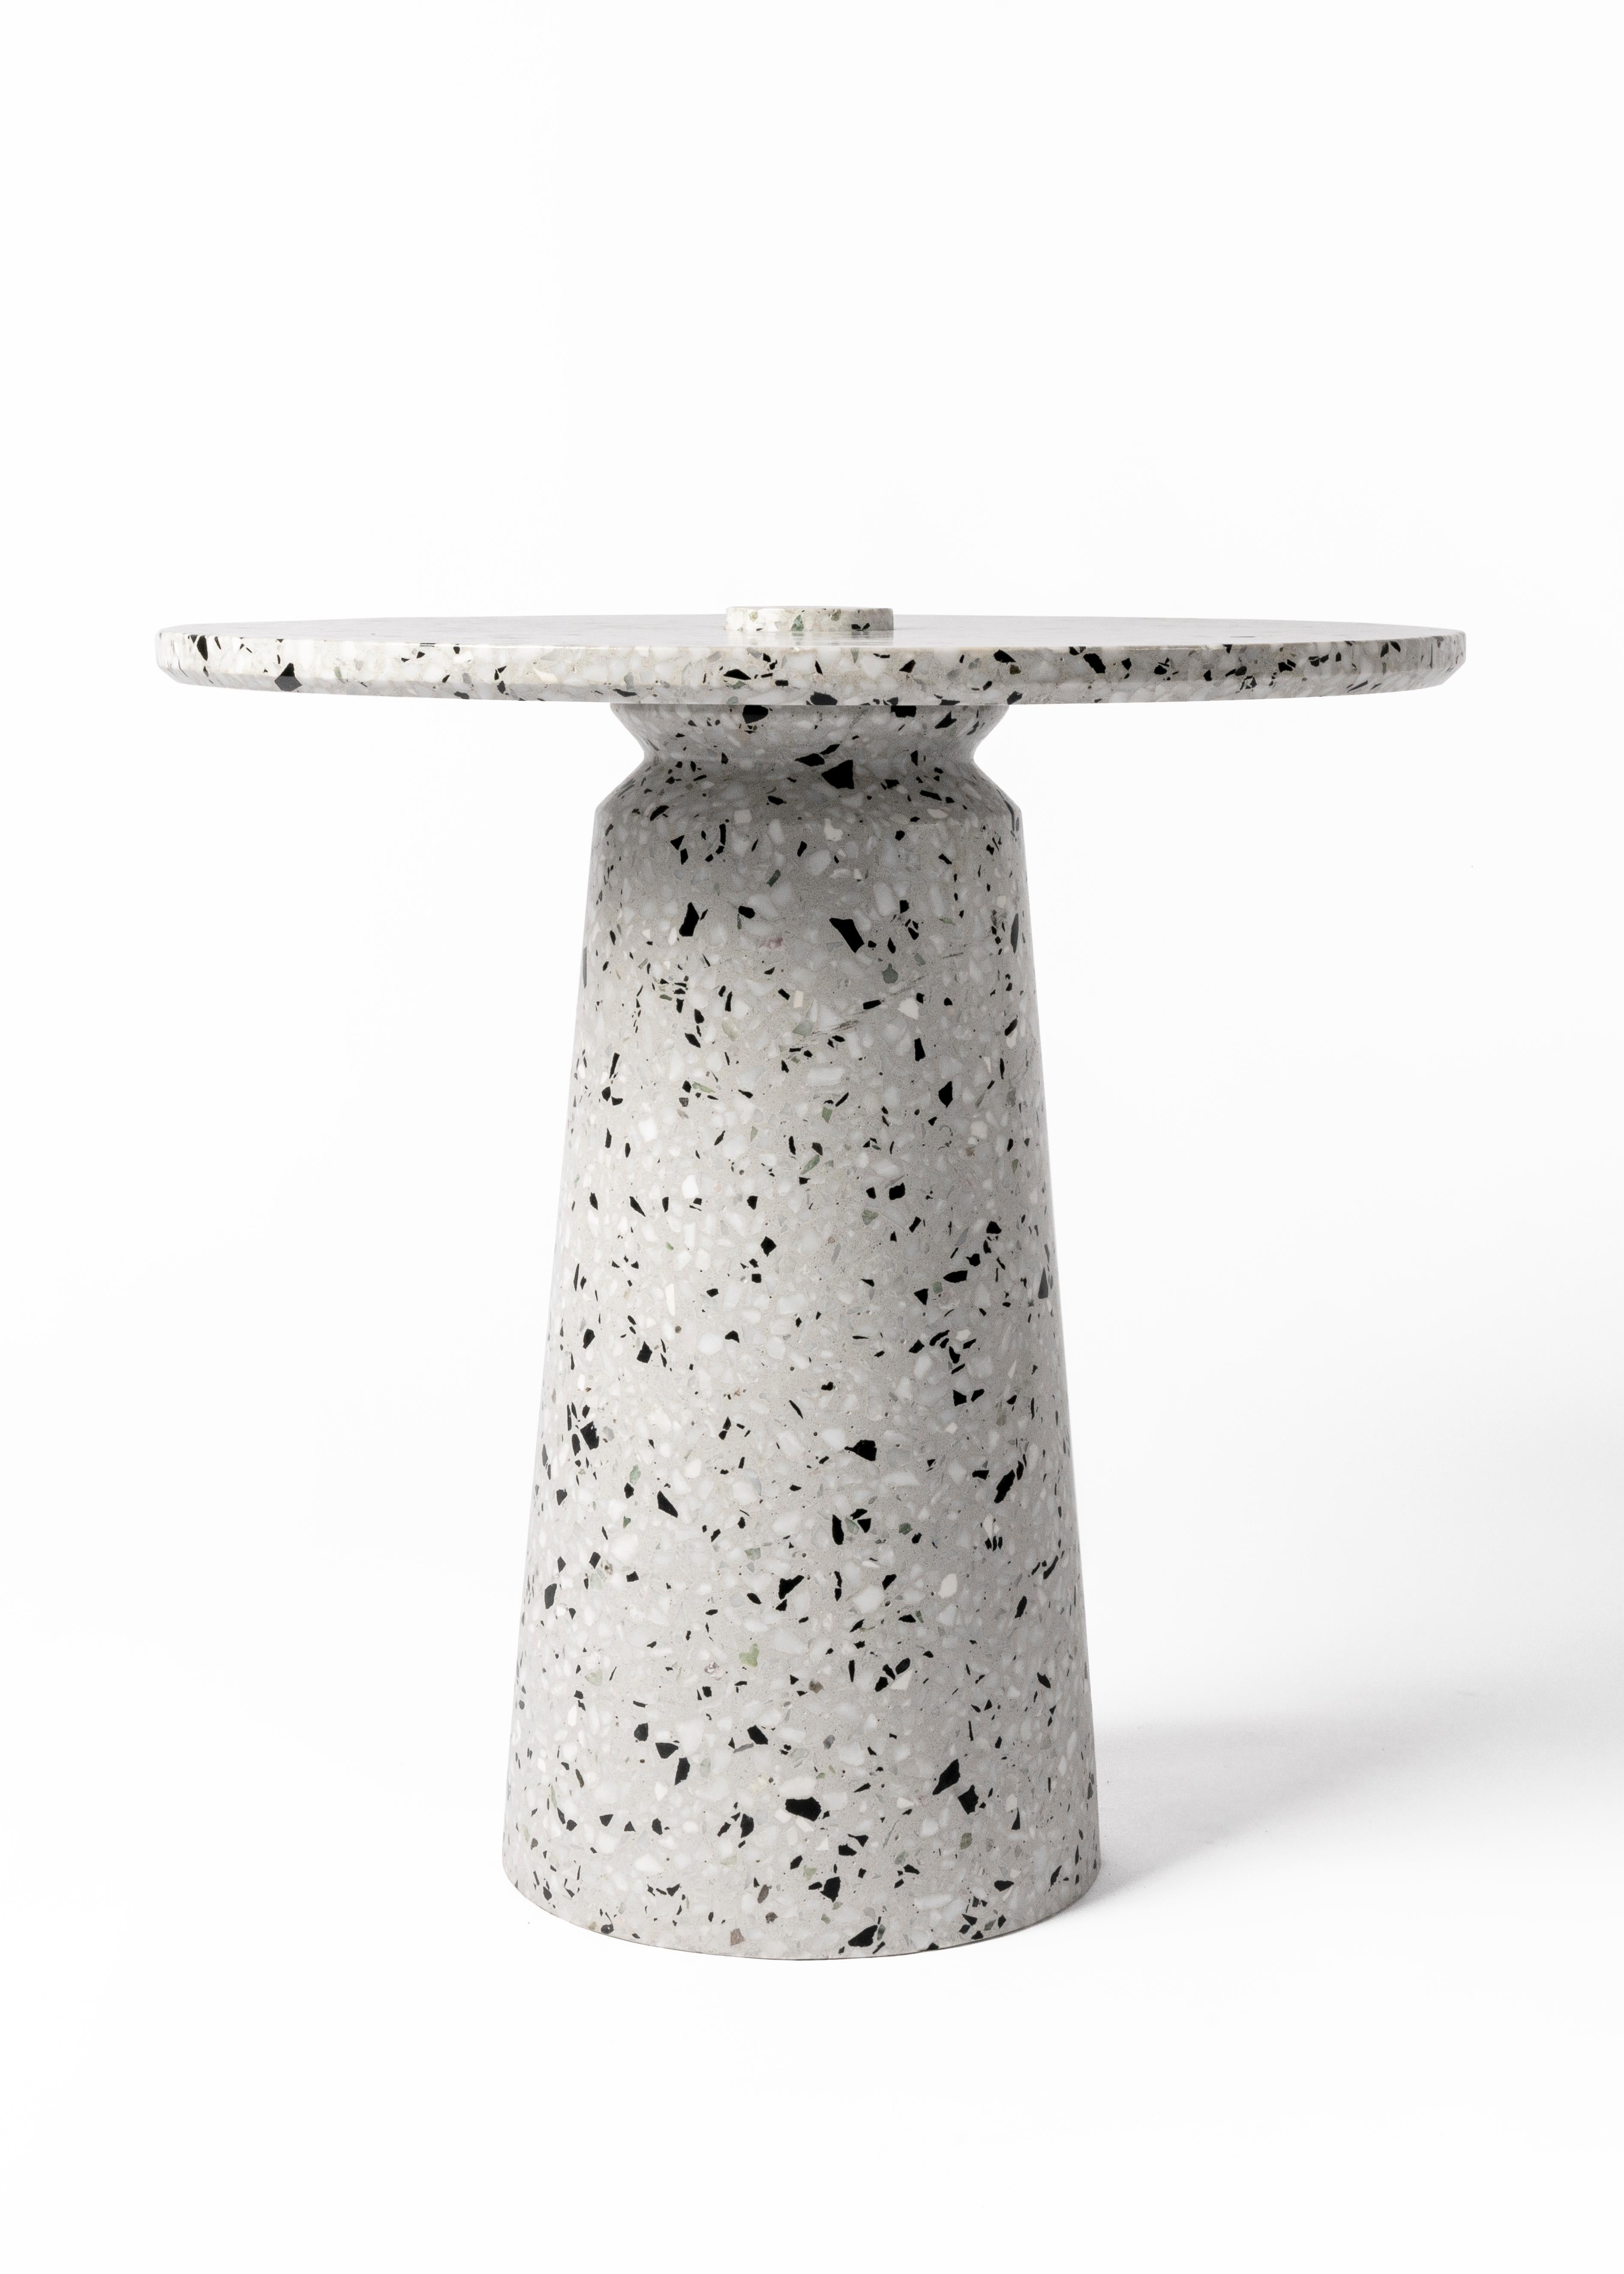 '8' side table in terrazzo (Black / White)

Measures: Ø 50 cm × H 50.3 cm

Bentu Design furniture and lightings derive its uniqueness from the simplicity of its forms and its materials. Designed and manufactured by the designers of Studio Bentu